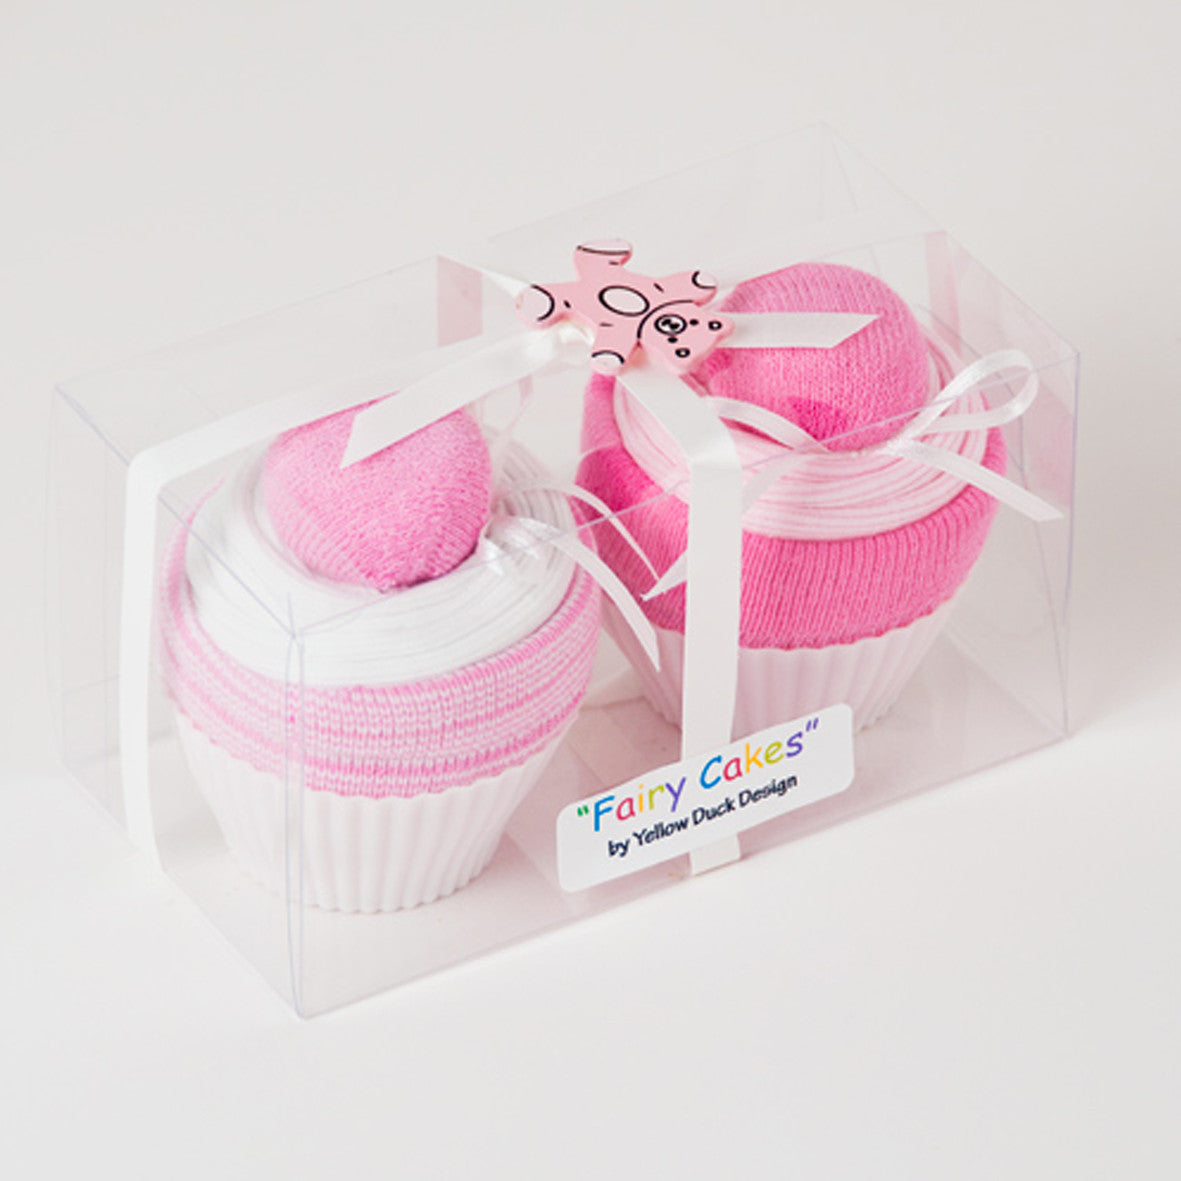 twin baby girl two cup cakes gift boxed